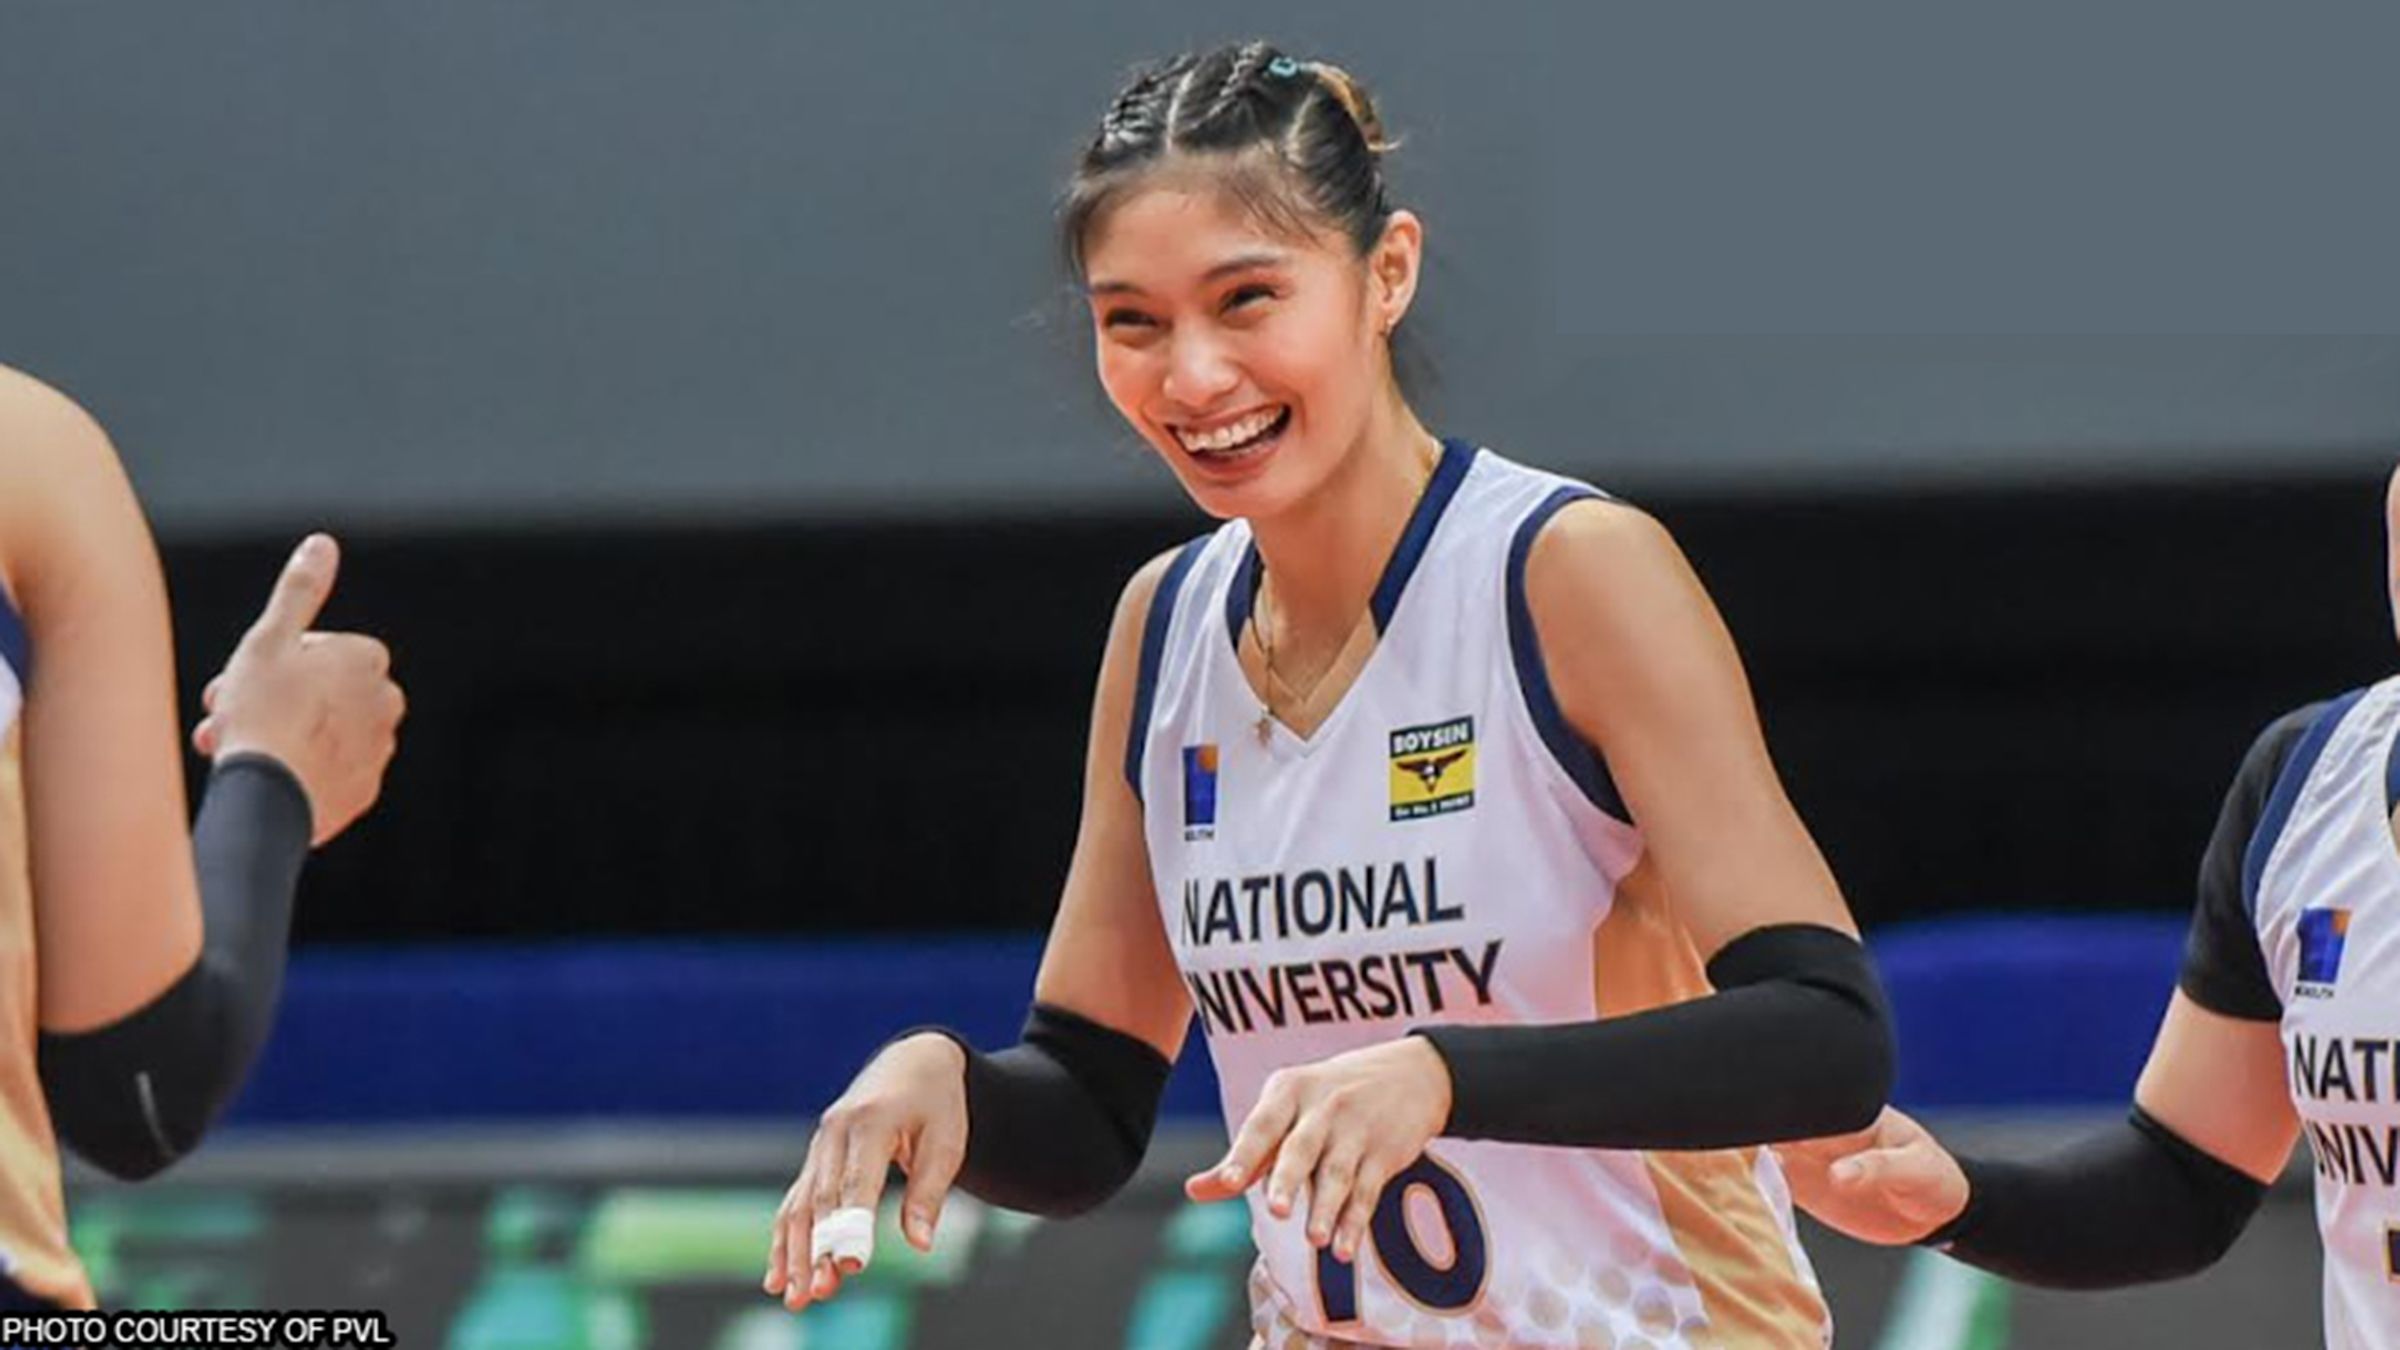 Ivy Lacsina won't play in the UAAP to turn pro